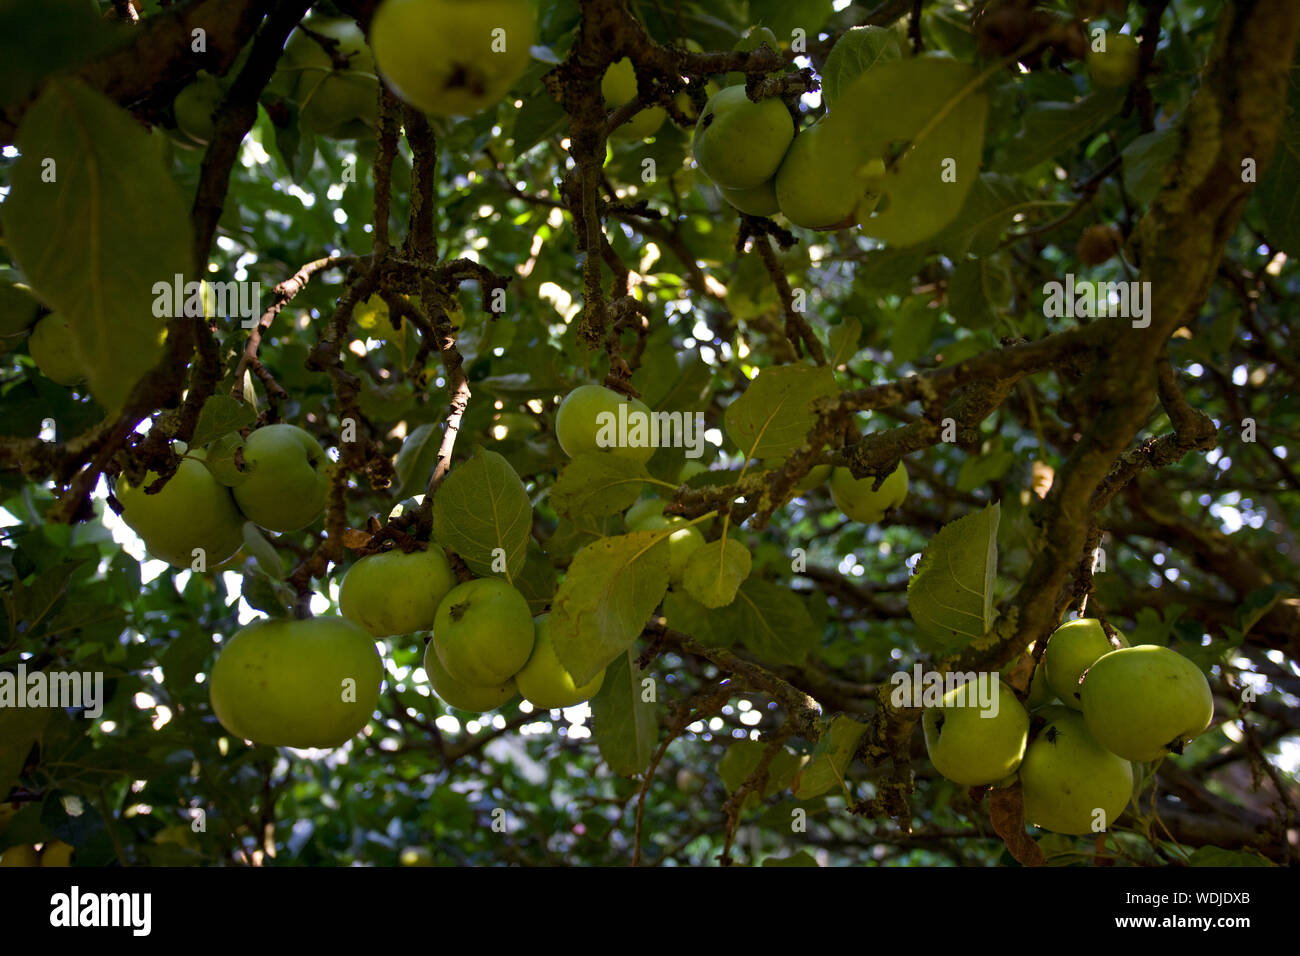 Green cooking apples in tree Stock Photo